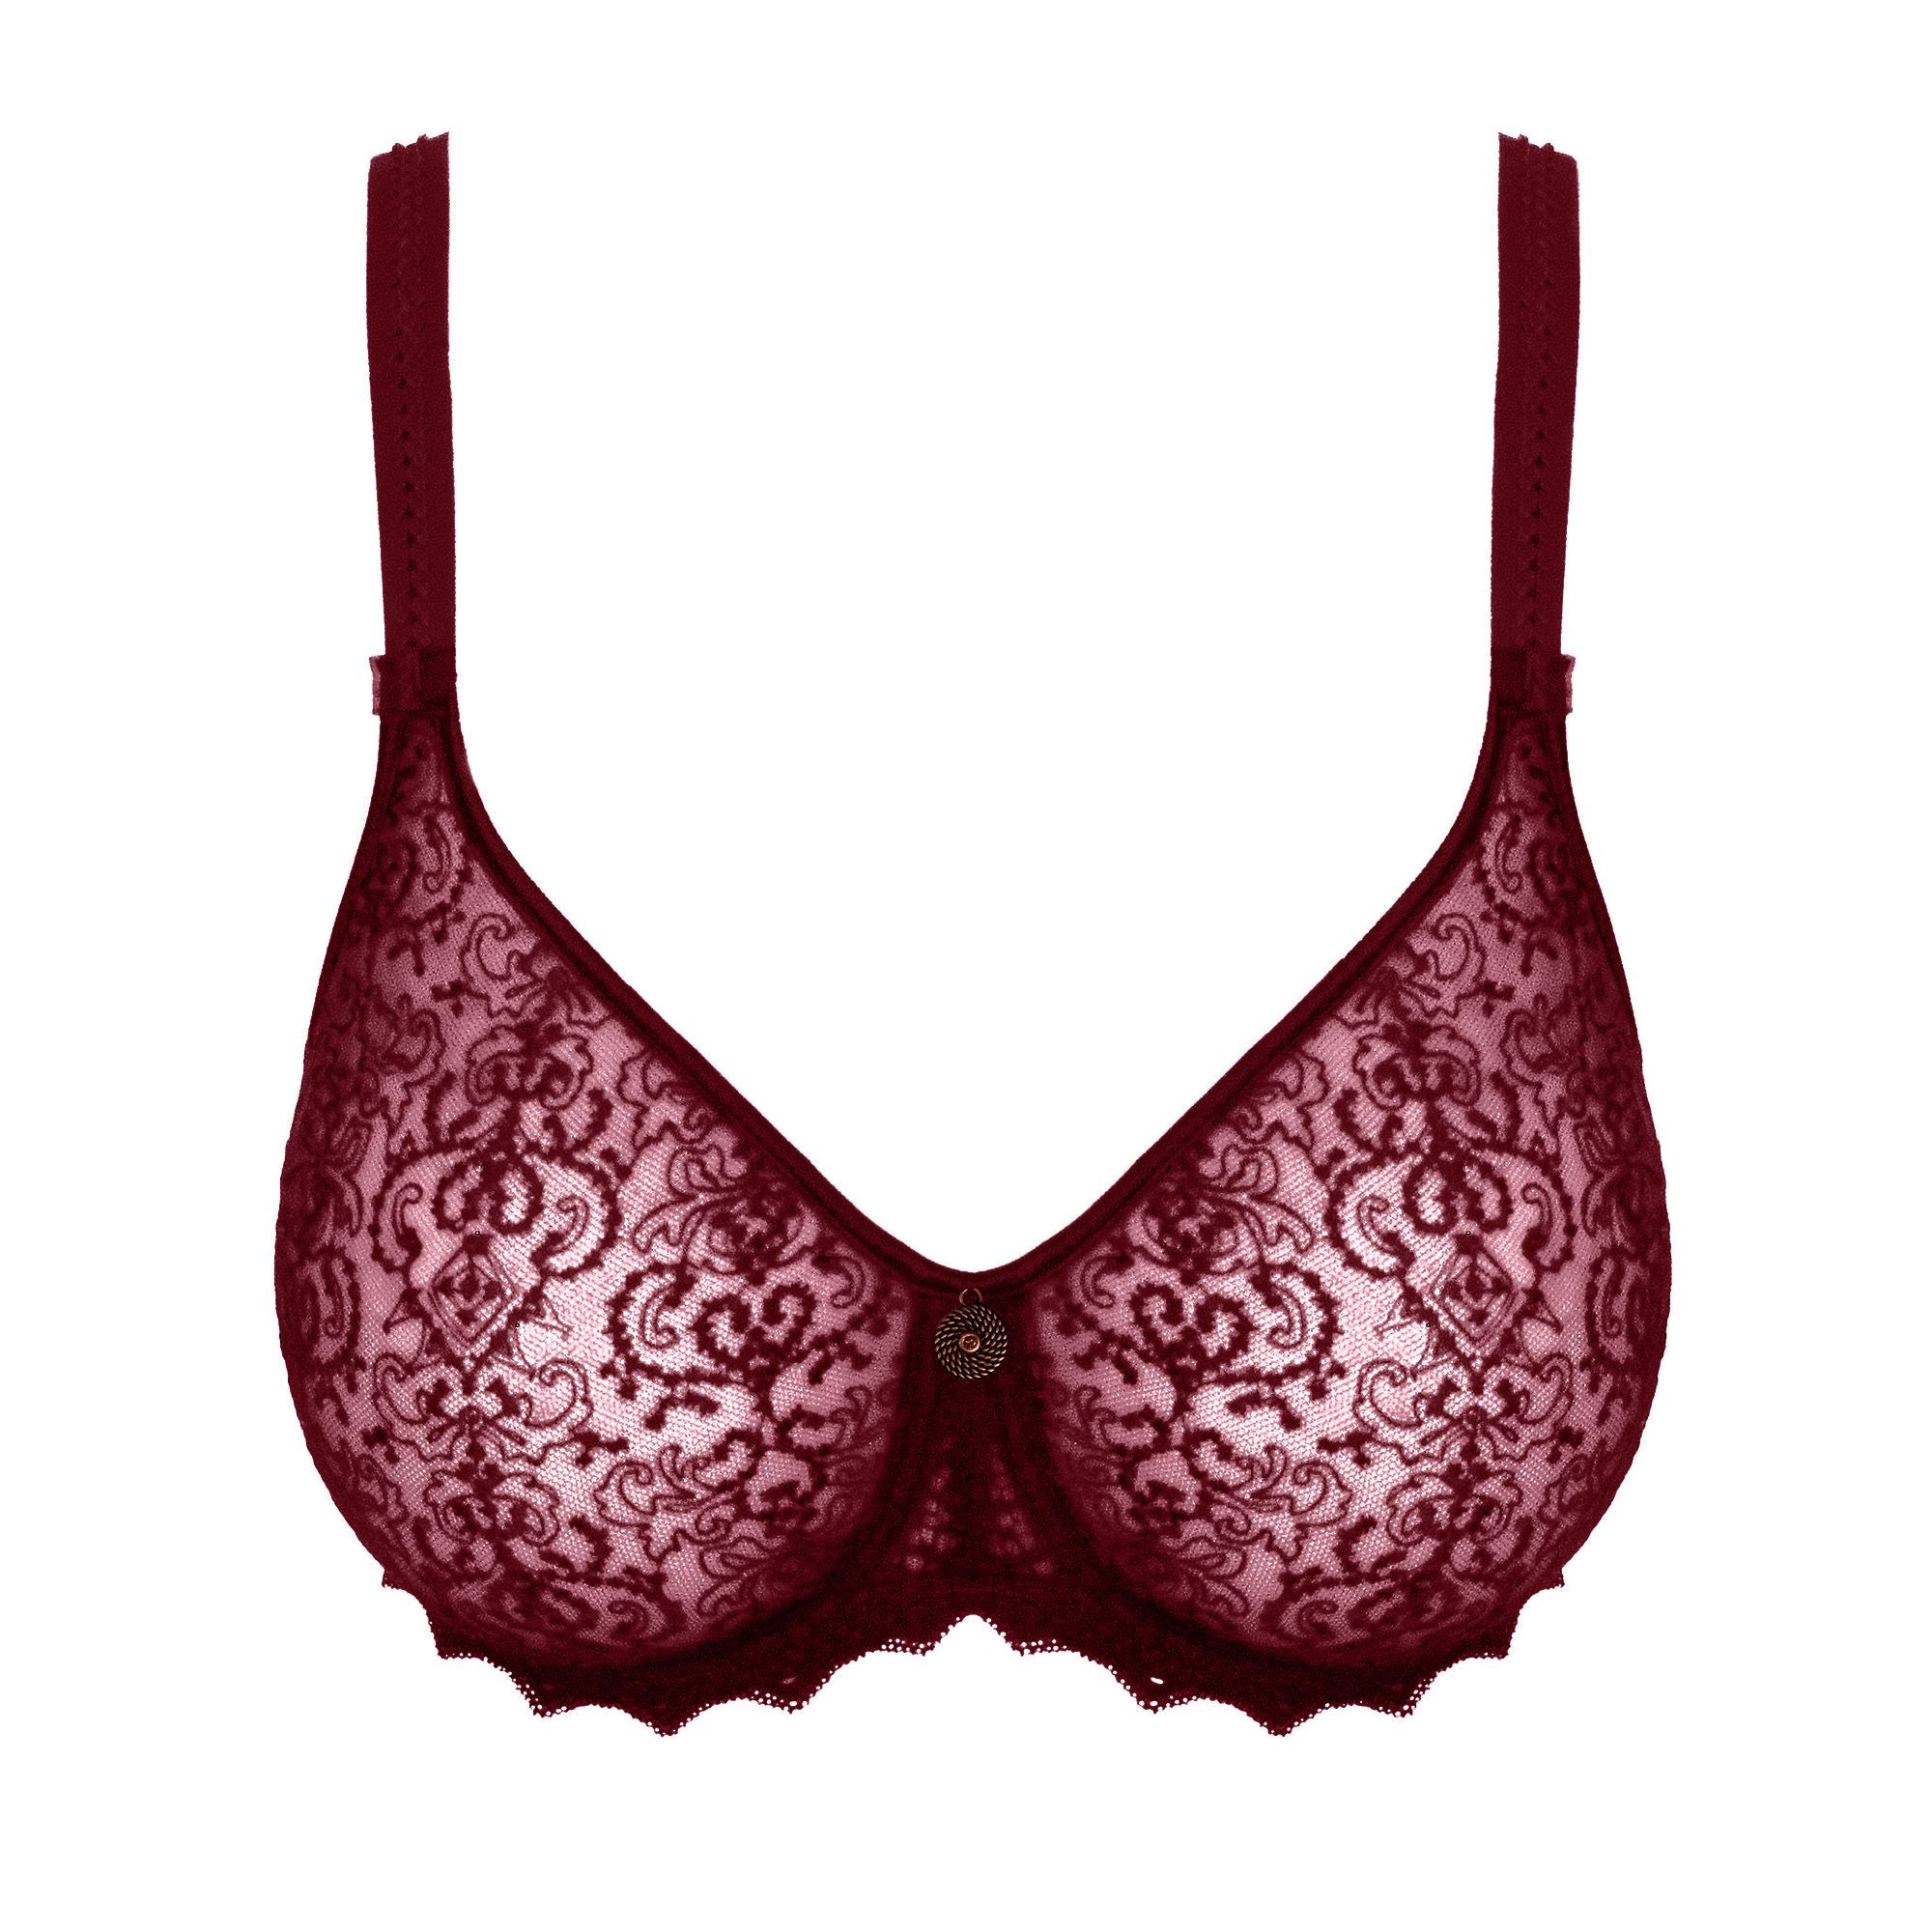 G Cup Bras Tagged Dominique Bras - HauteFlair